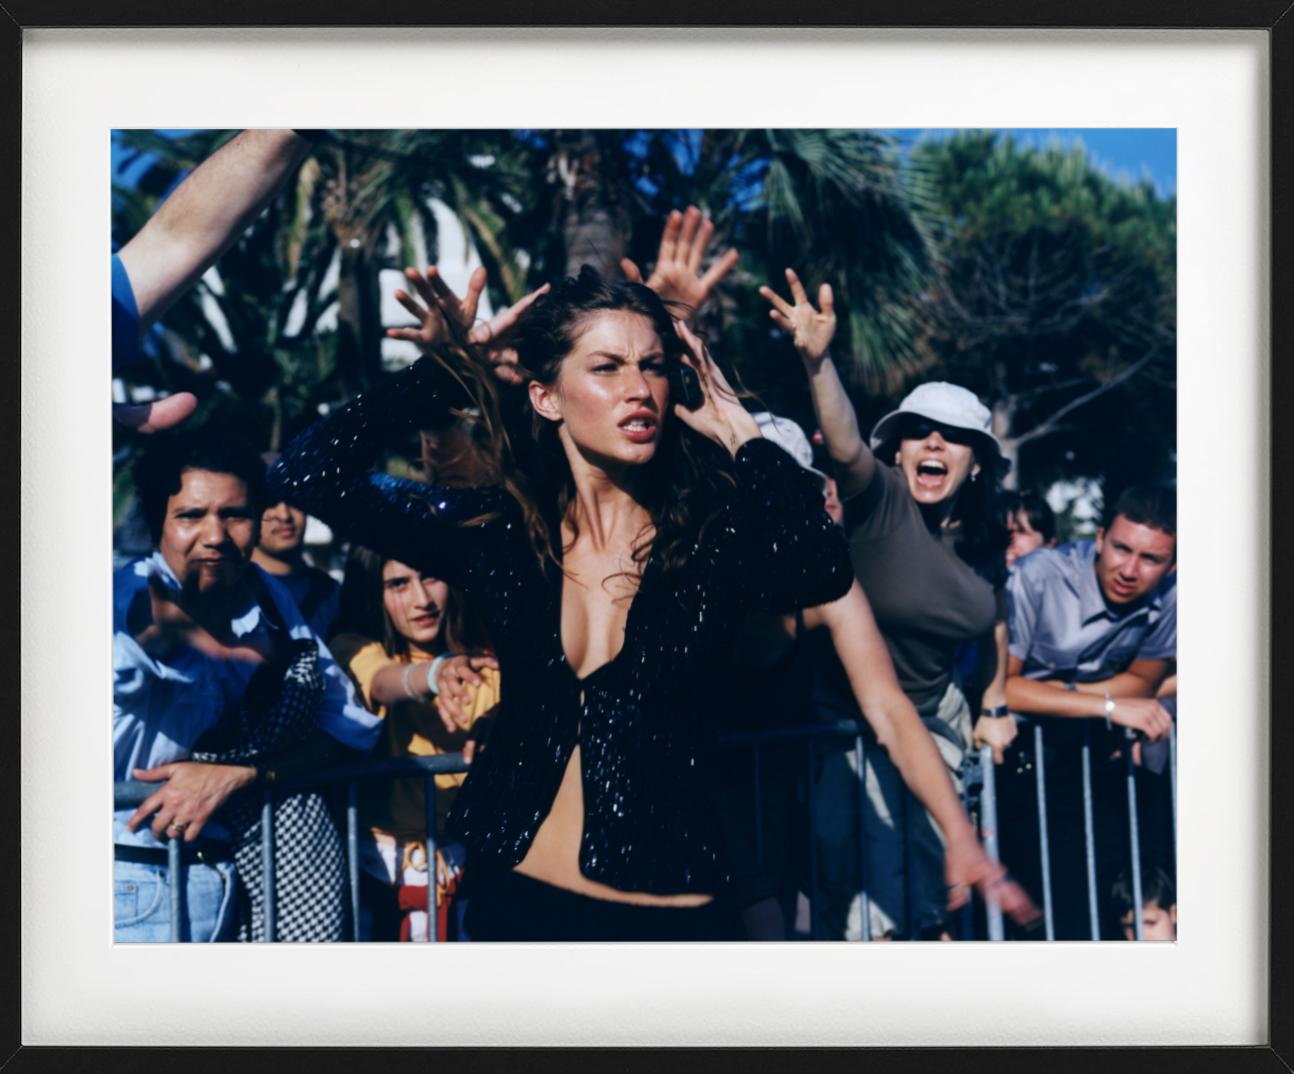 Gisele Buendchen with Paparazzis, Cannes - supermodels escaping from the press - Photograph by Michel Comte